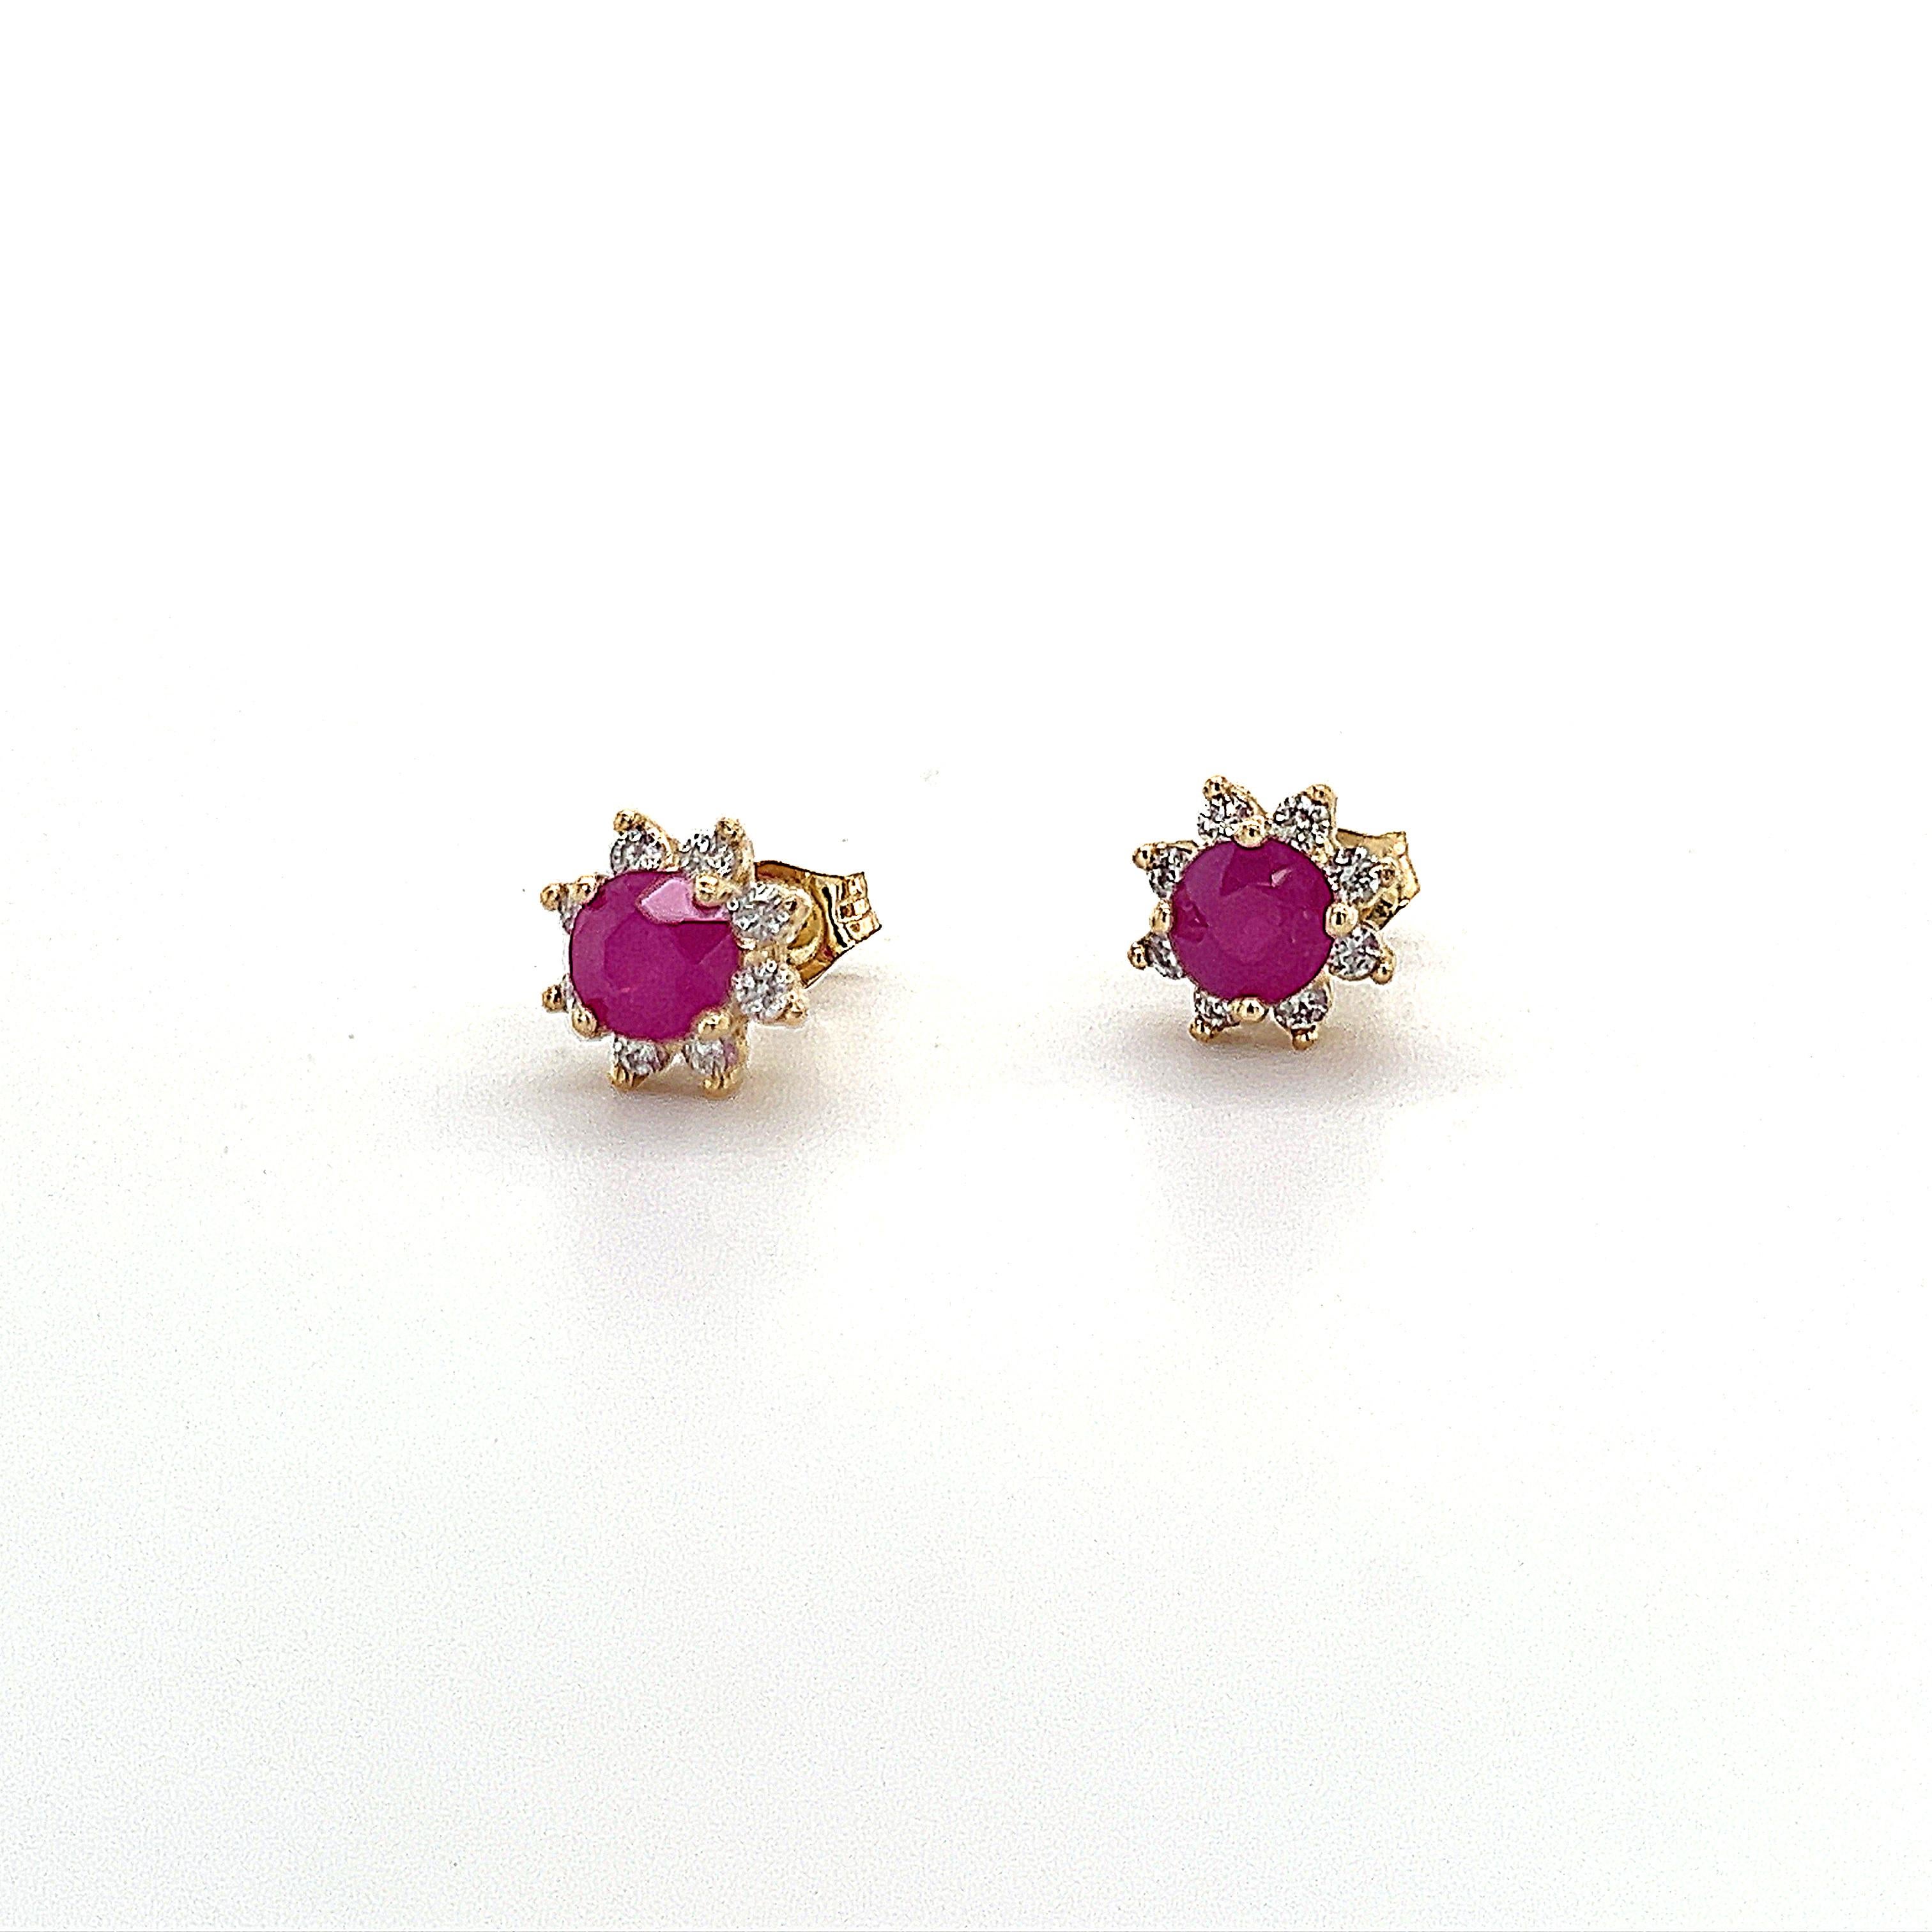 Natural Ruby Diamond Earrings 14k Gold 1.25 TCW Certified For Sale 2